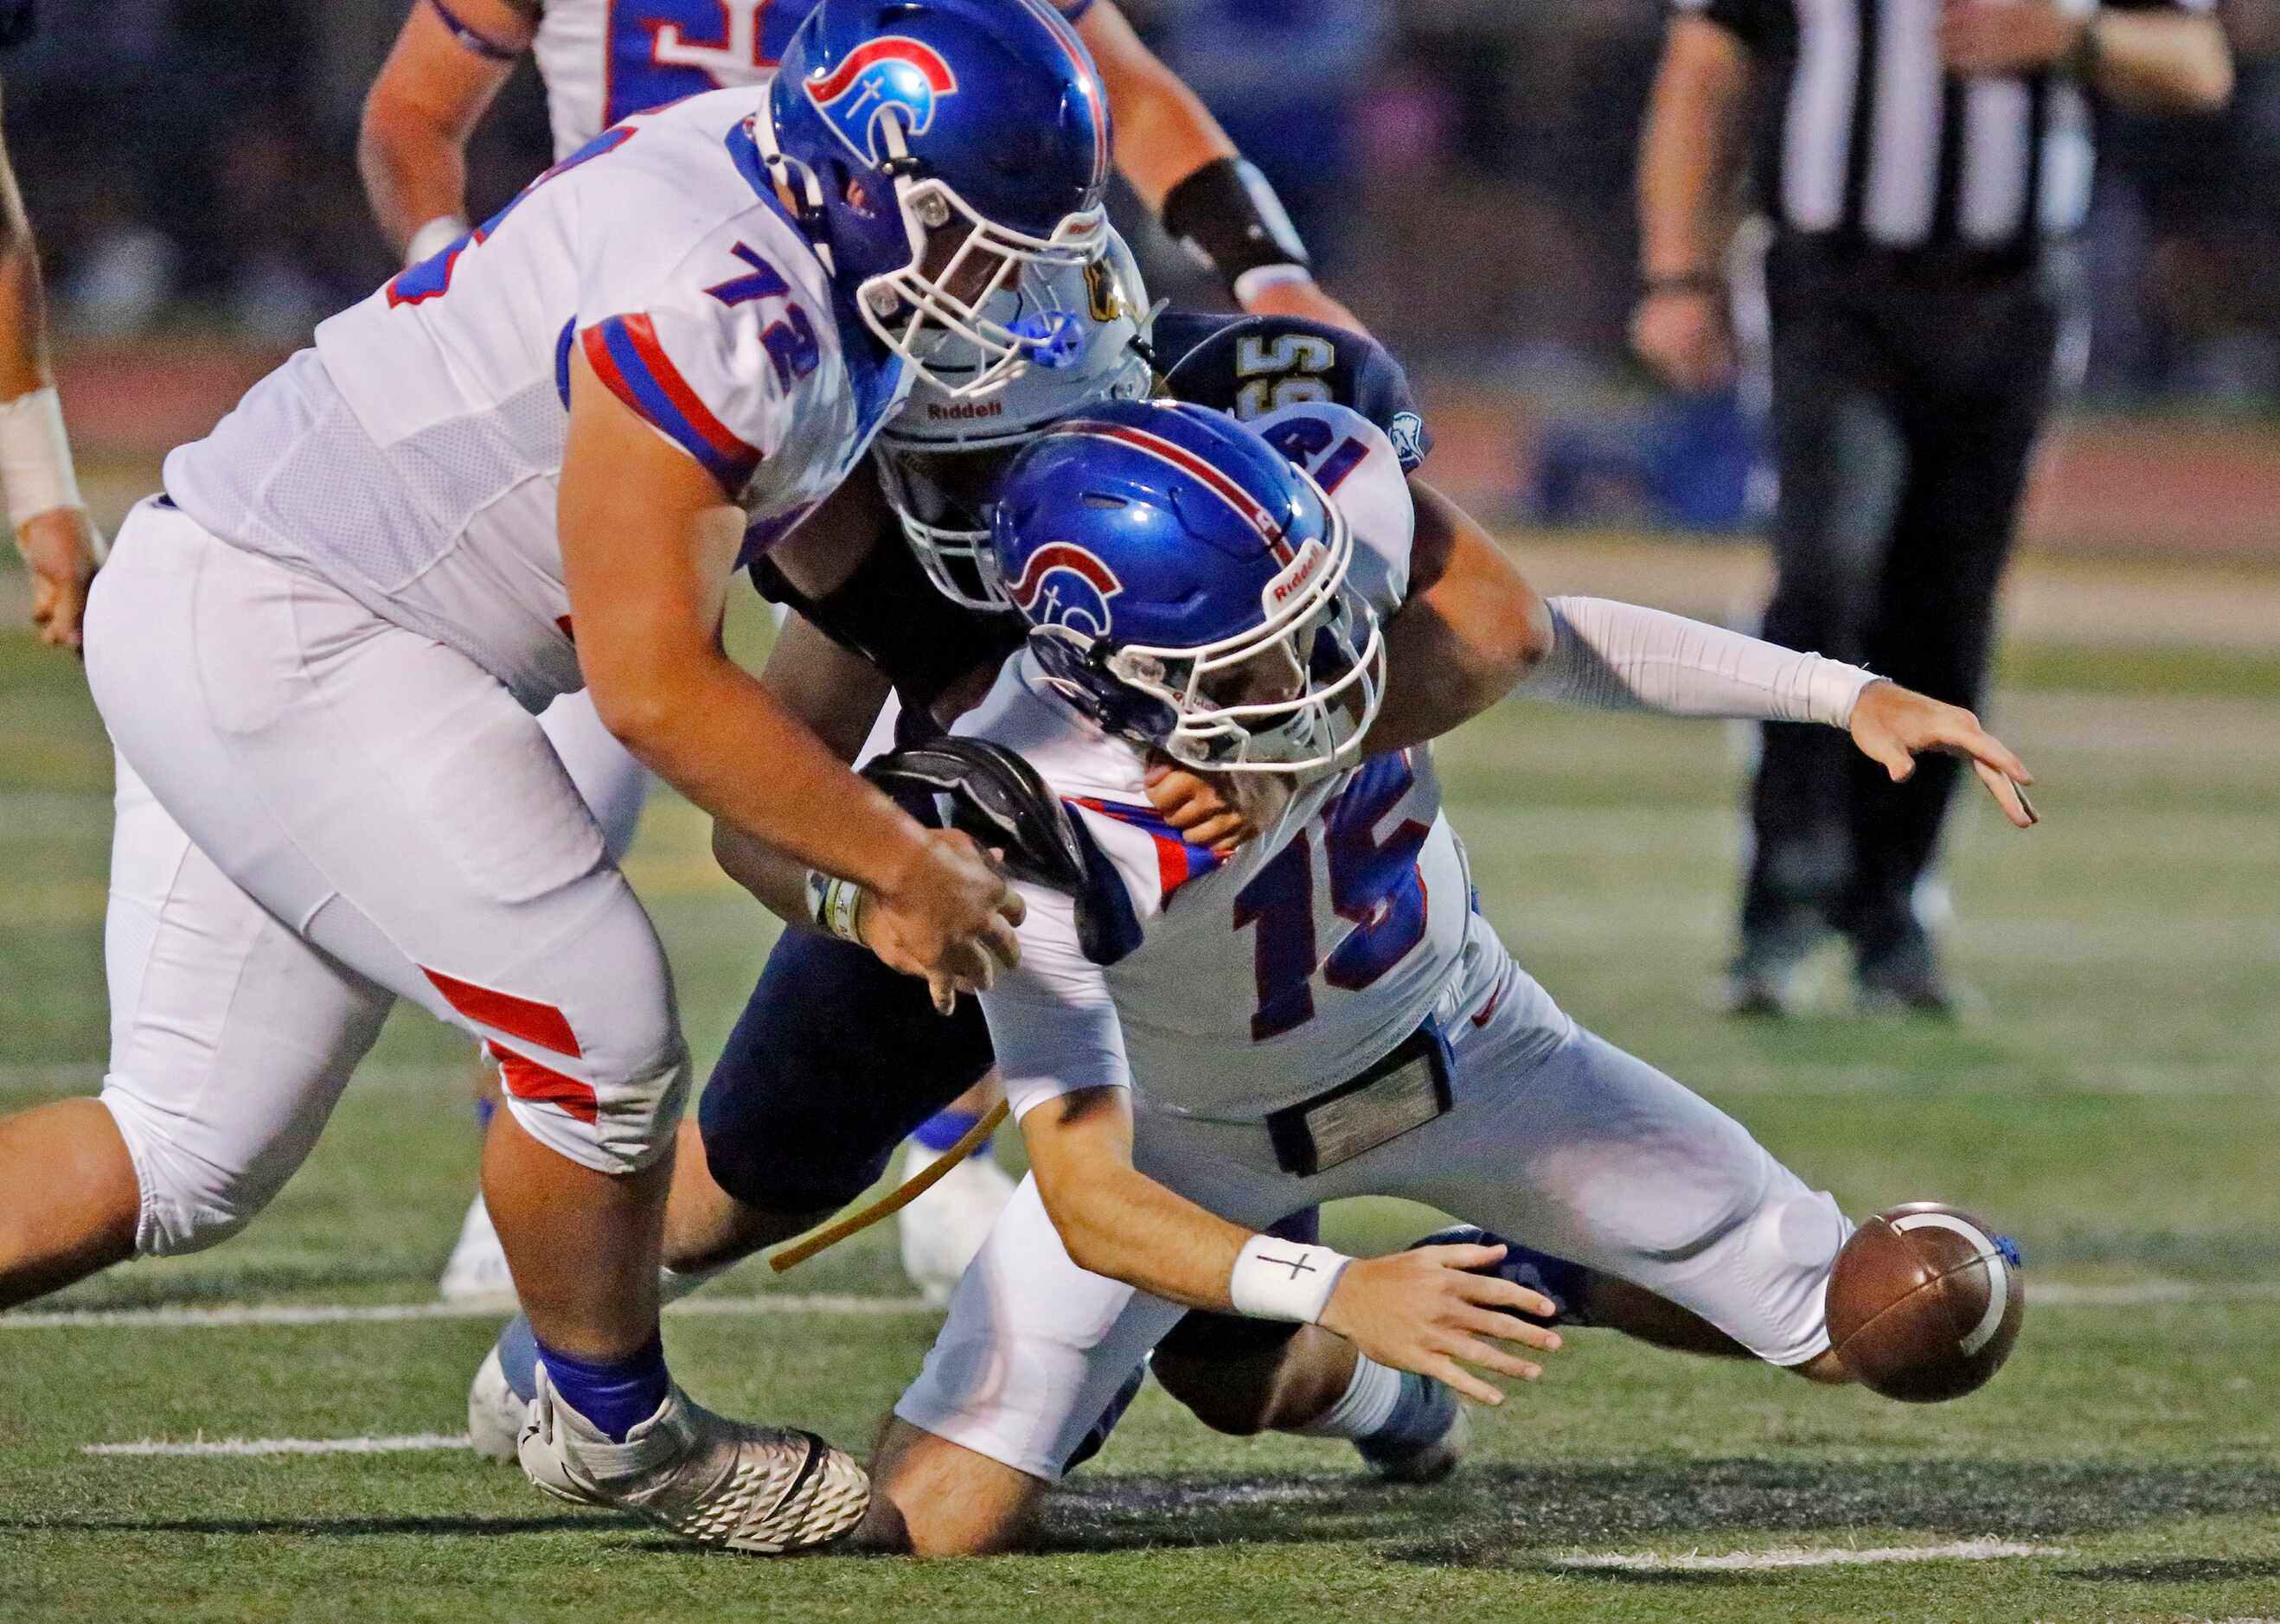 Trinity Christian Academy quarterback Aidan Mills (15) recovered his own fumble as he was...